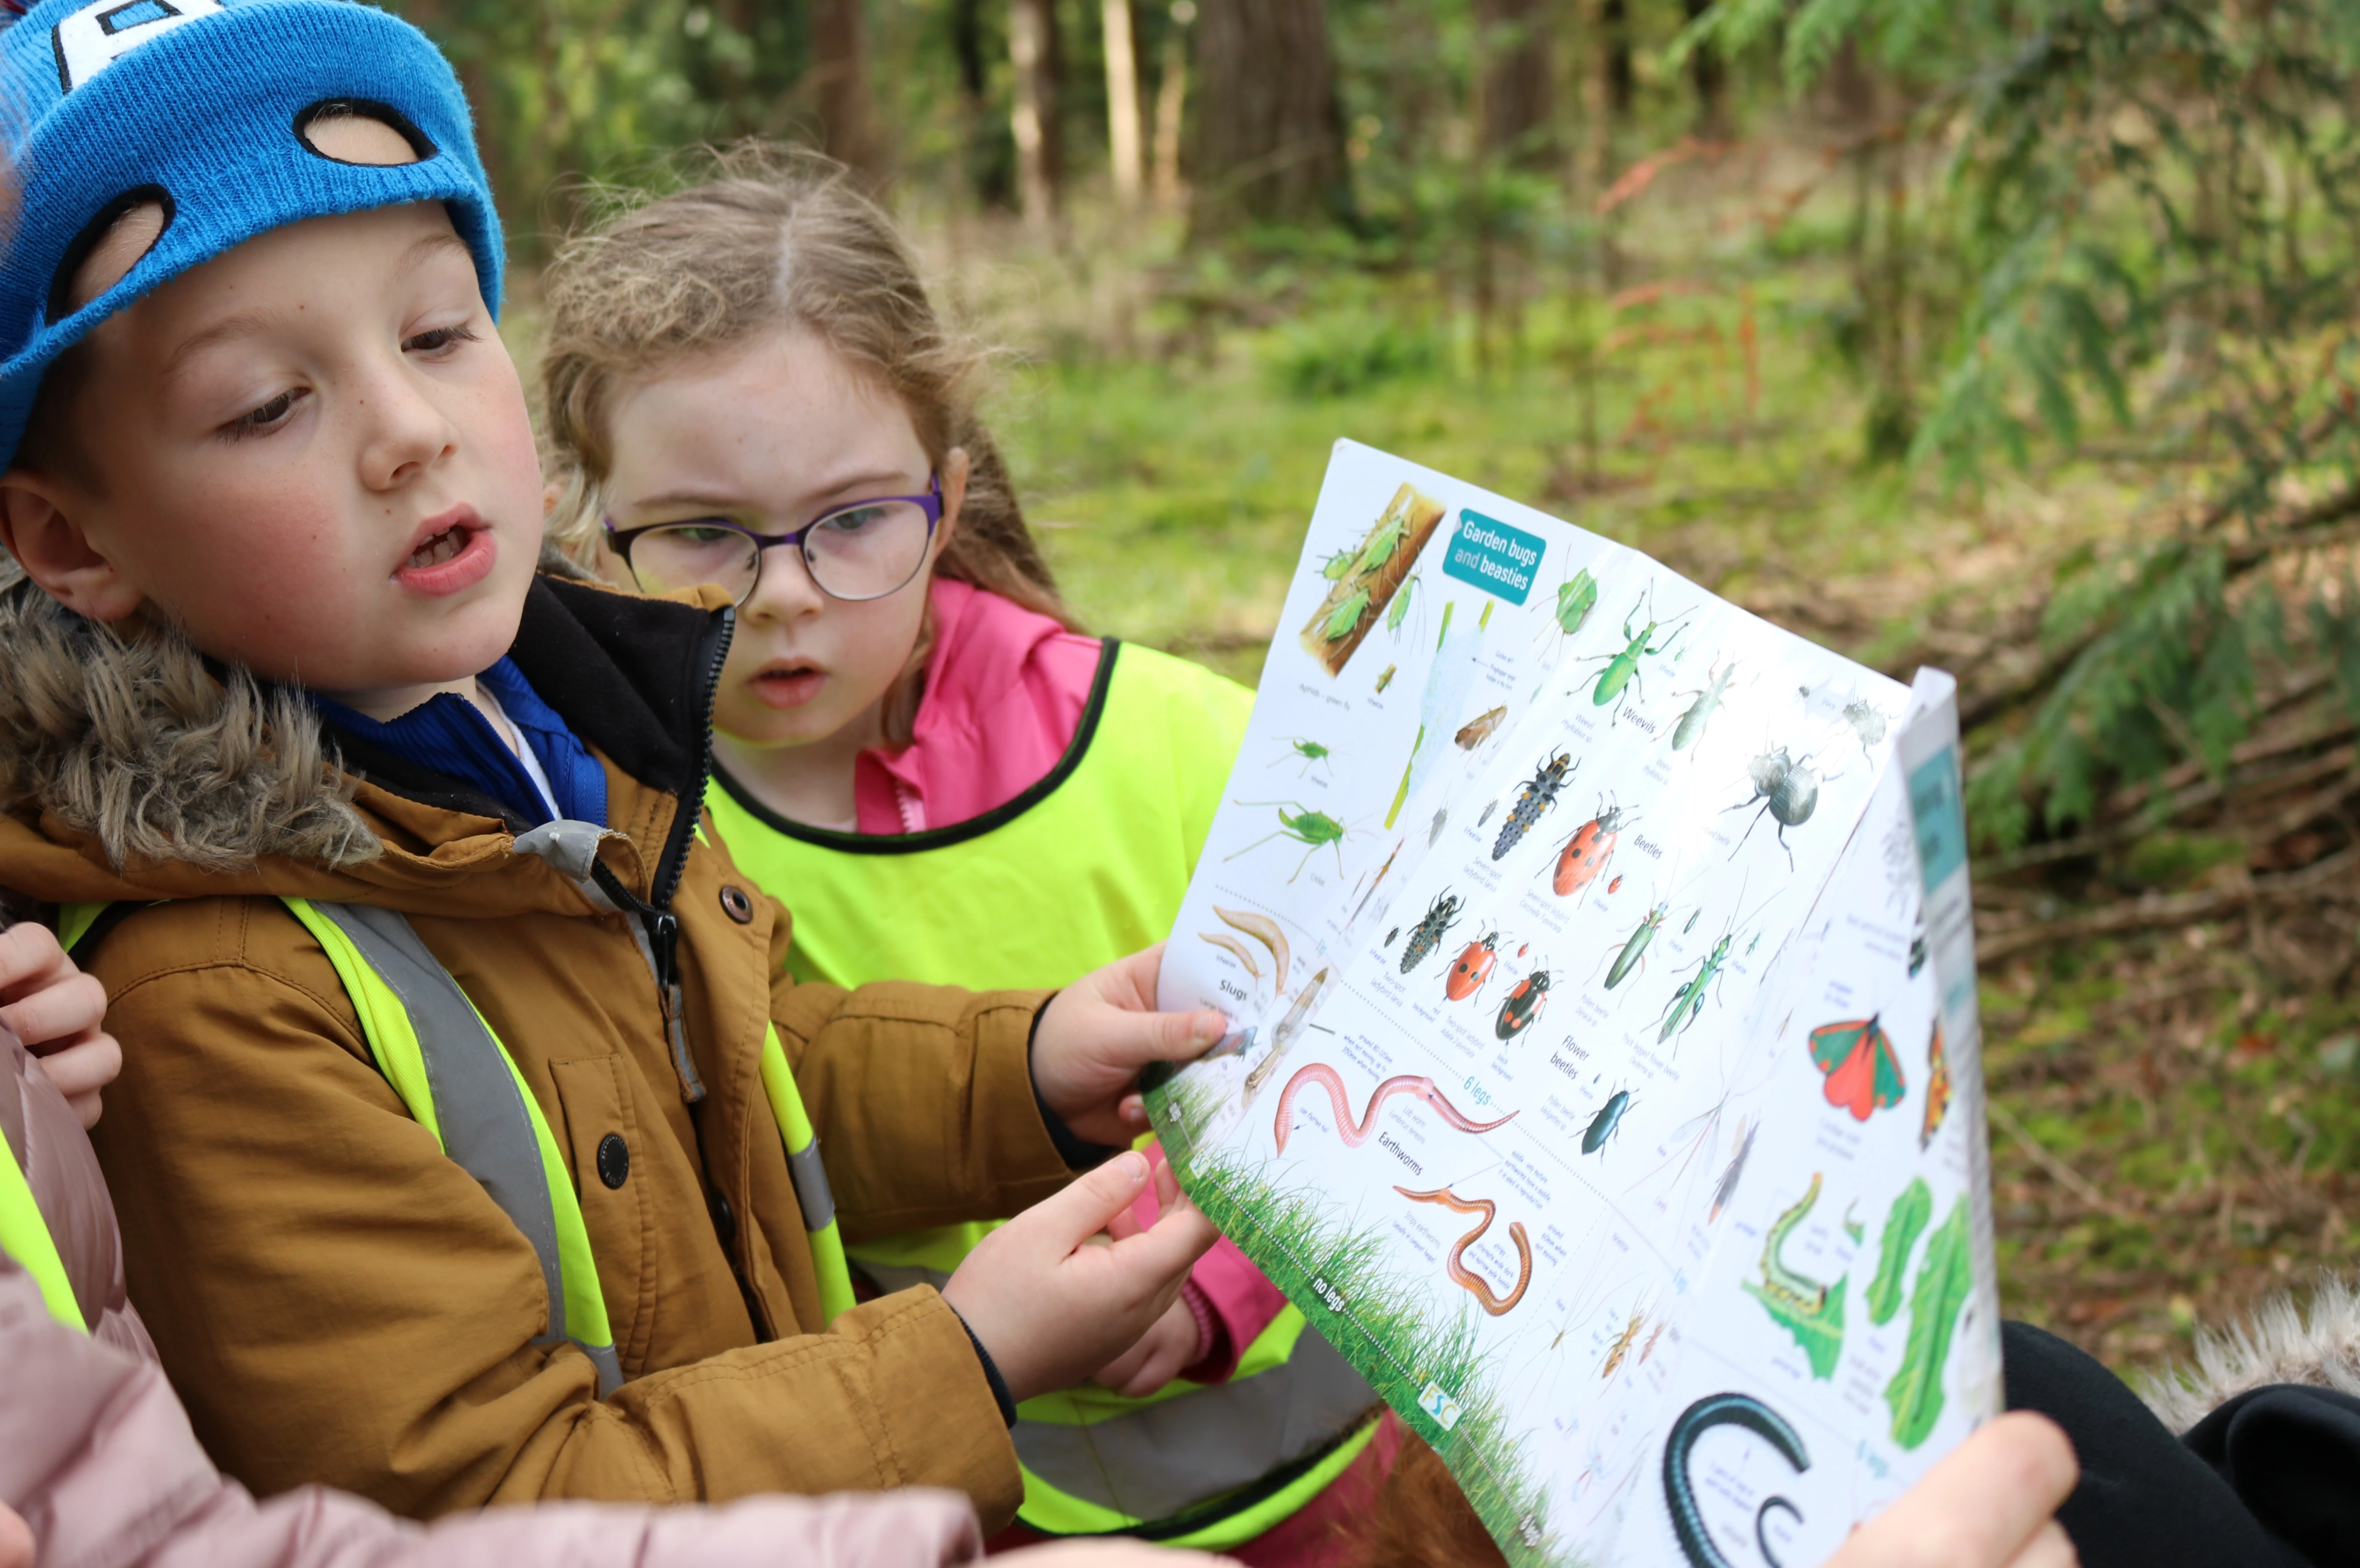 Cash squeeze means children missing out on outdoor education